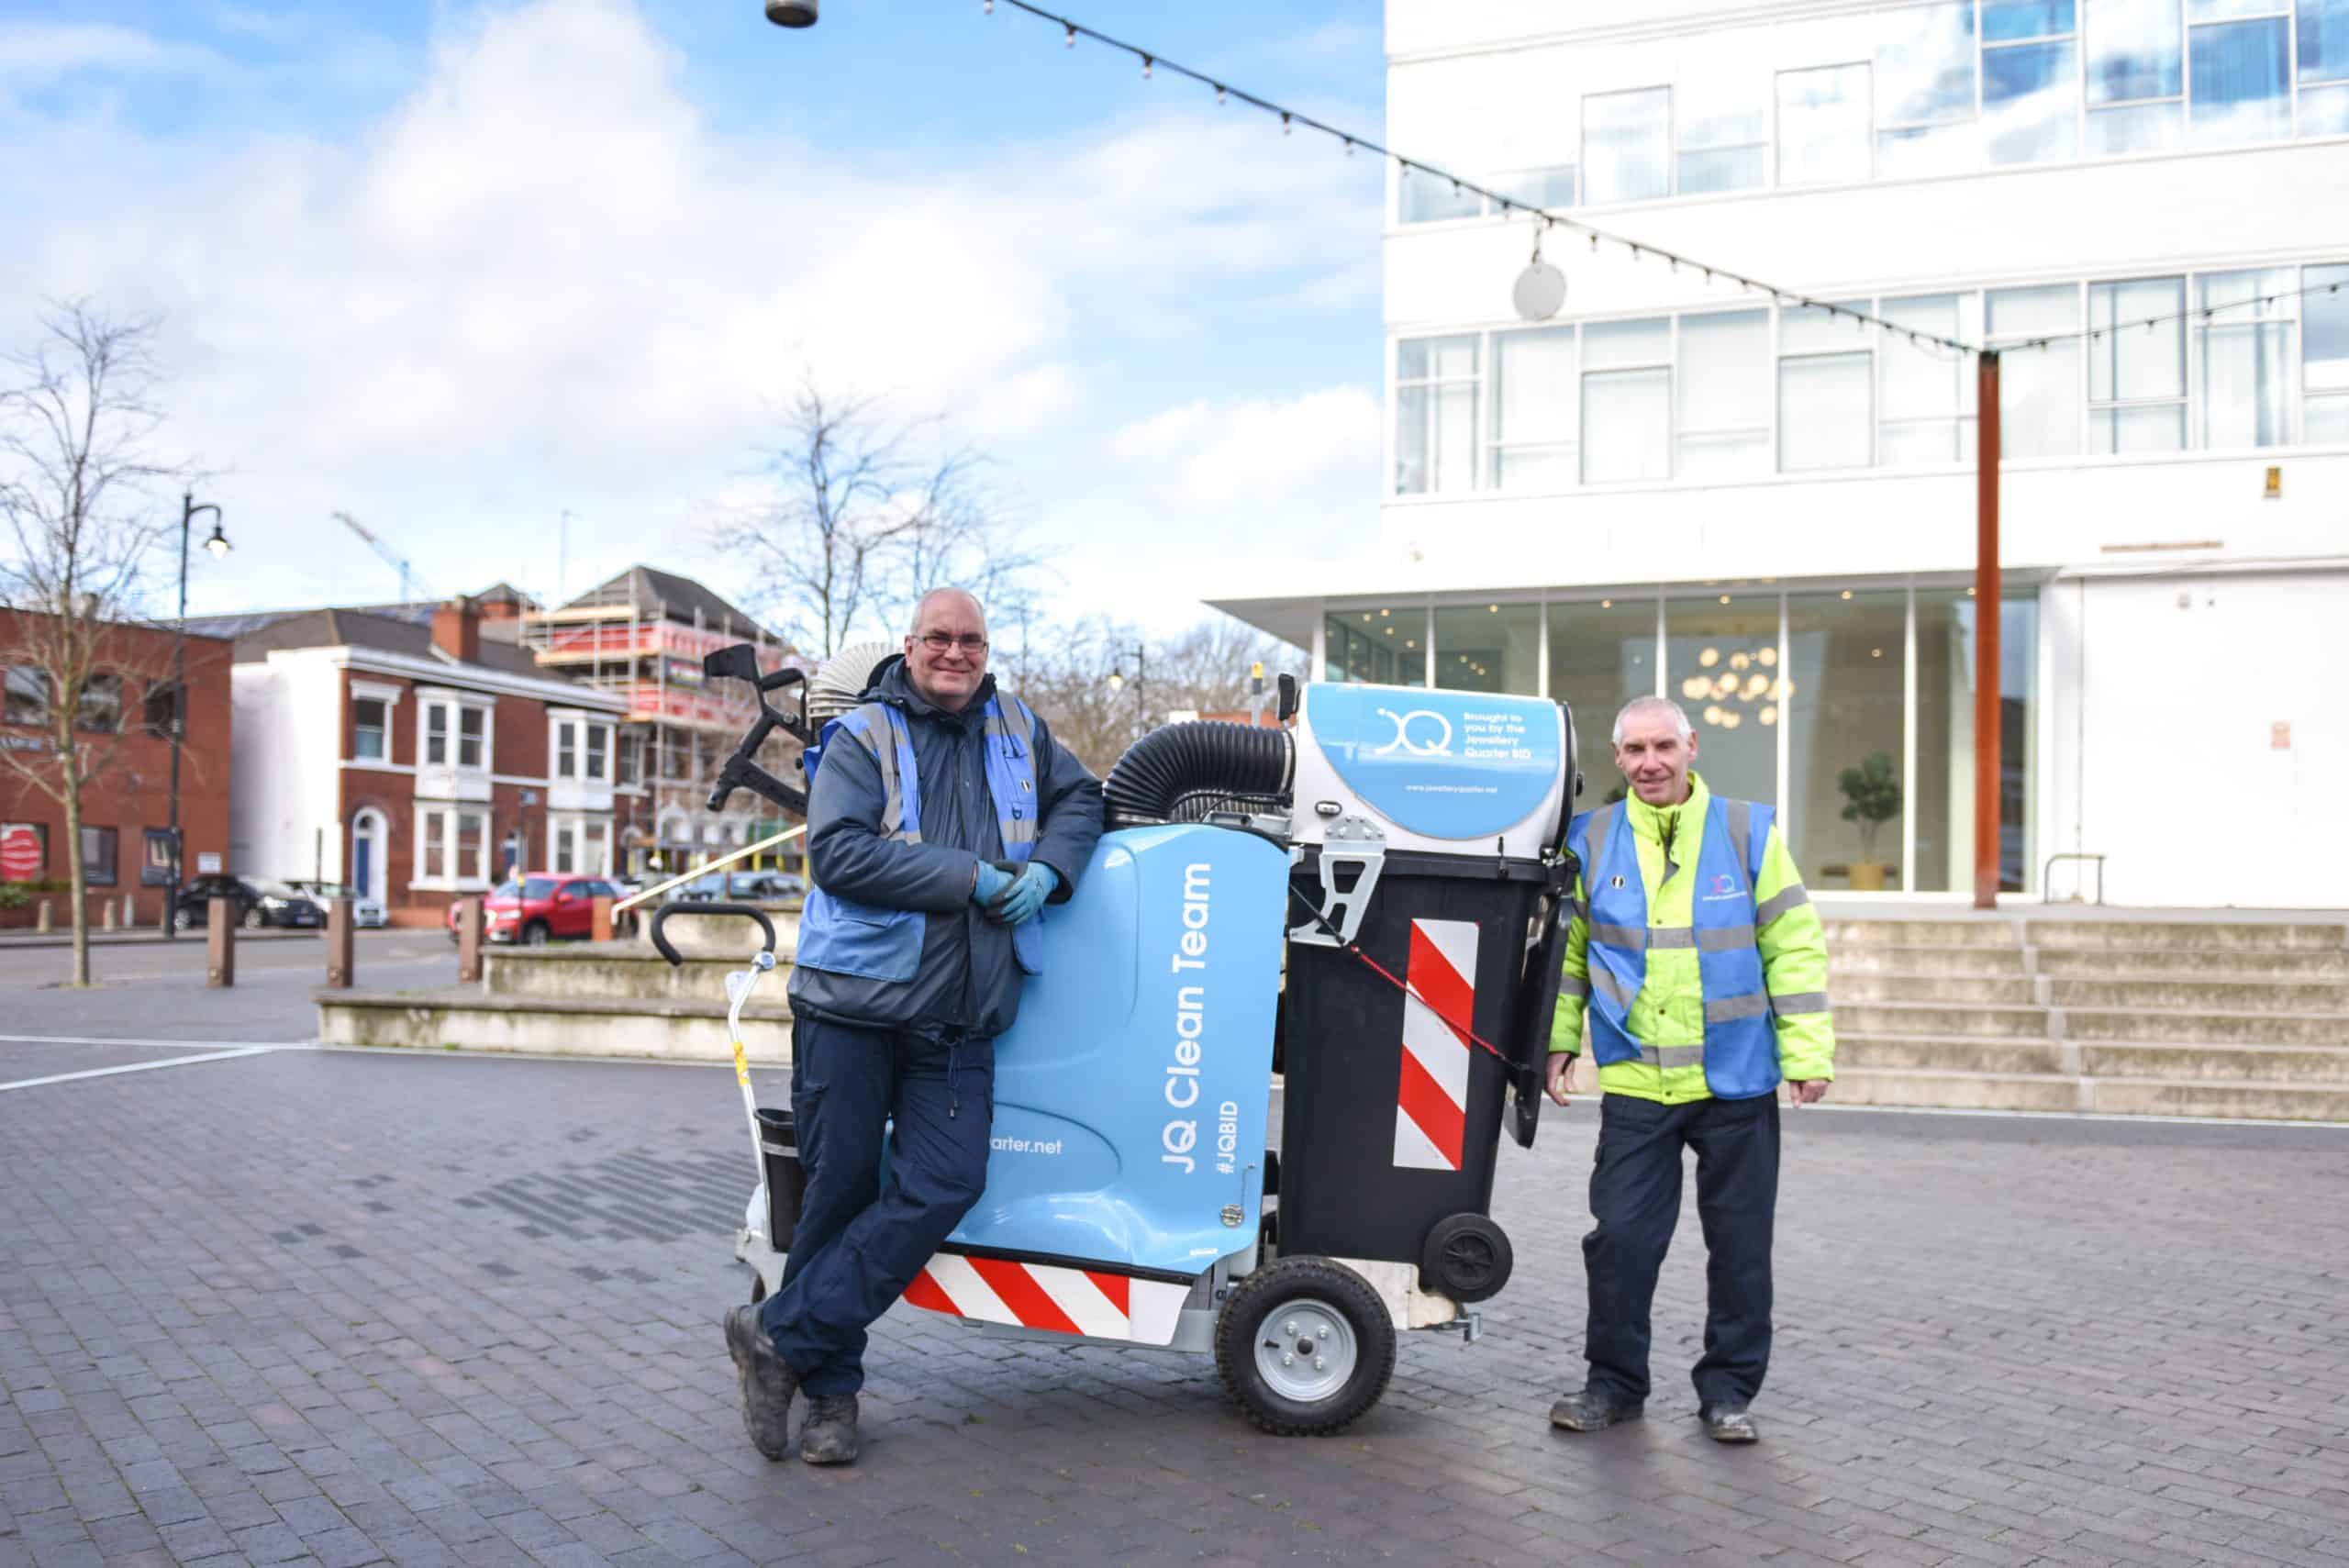 Dennis Cluley and Steve Male with the Glutton cleaning machine